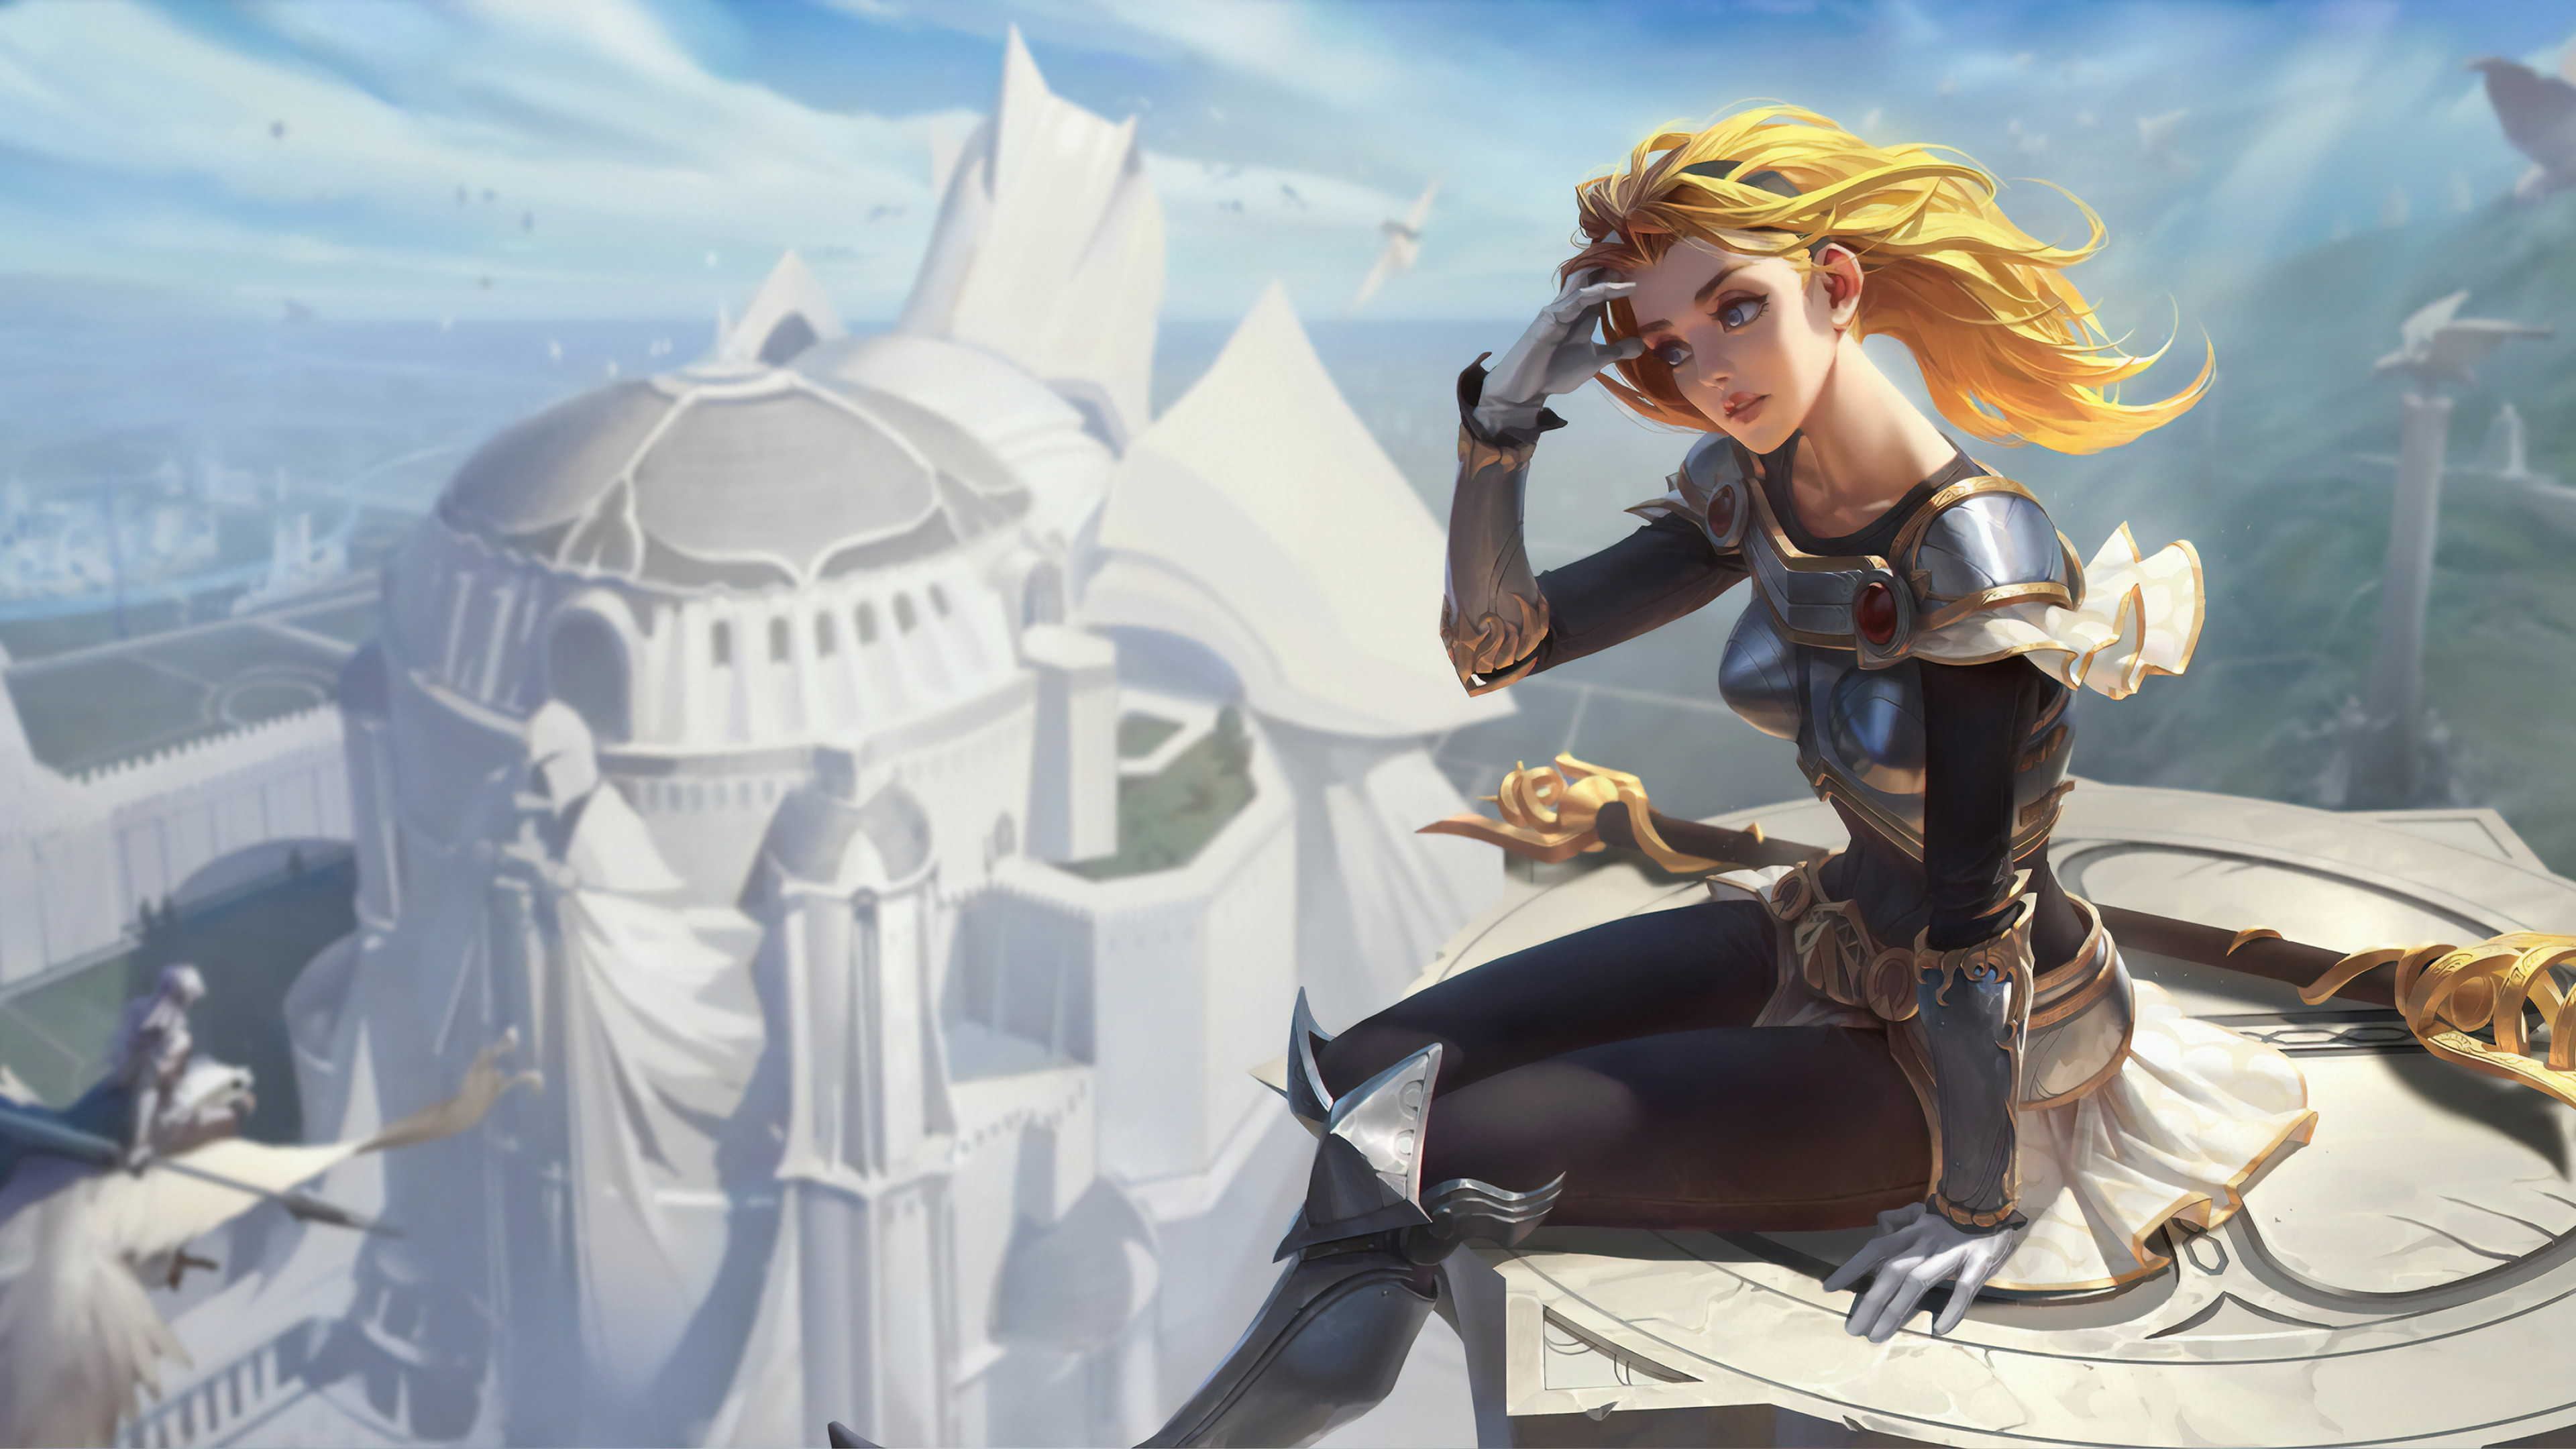 Lux from League of Legends bored Wallpaper 4k Ultra HD ID6616